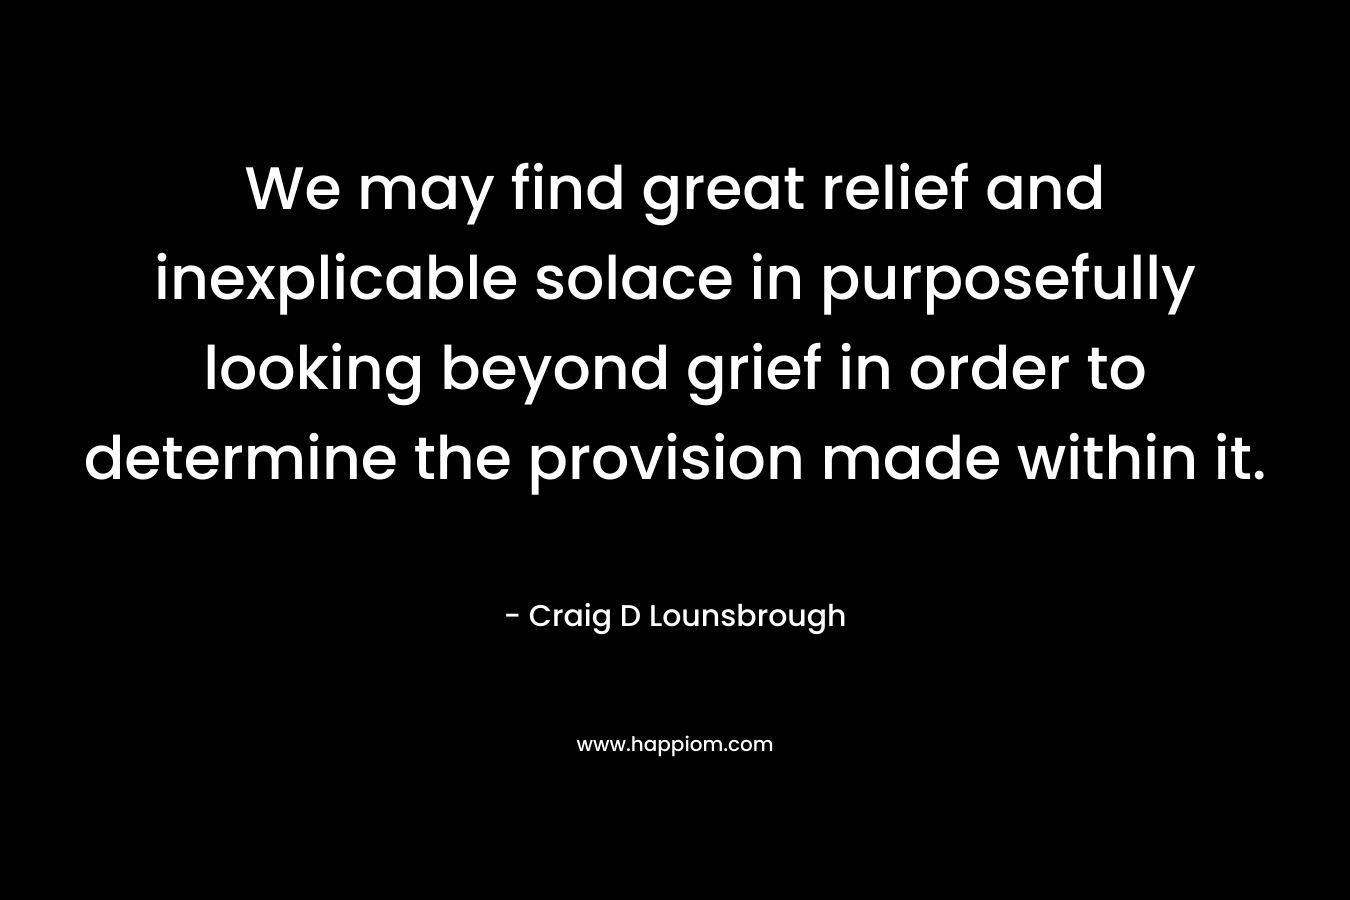 We may find great relief and inexplicable solace in purposefully looking beyond grief in order to determine the provision made within it. – Craig D Lounsbrough